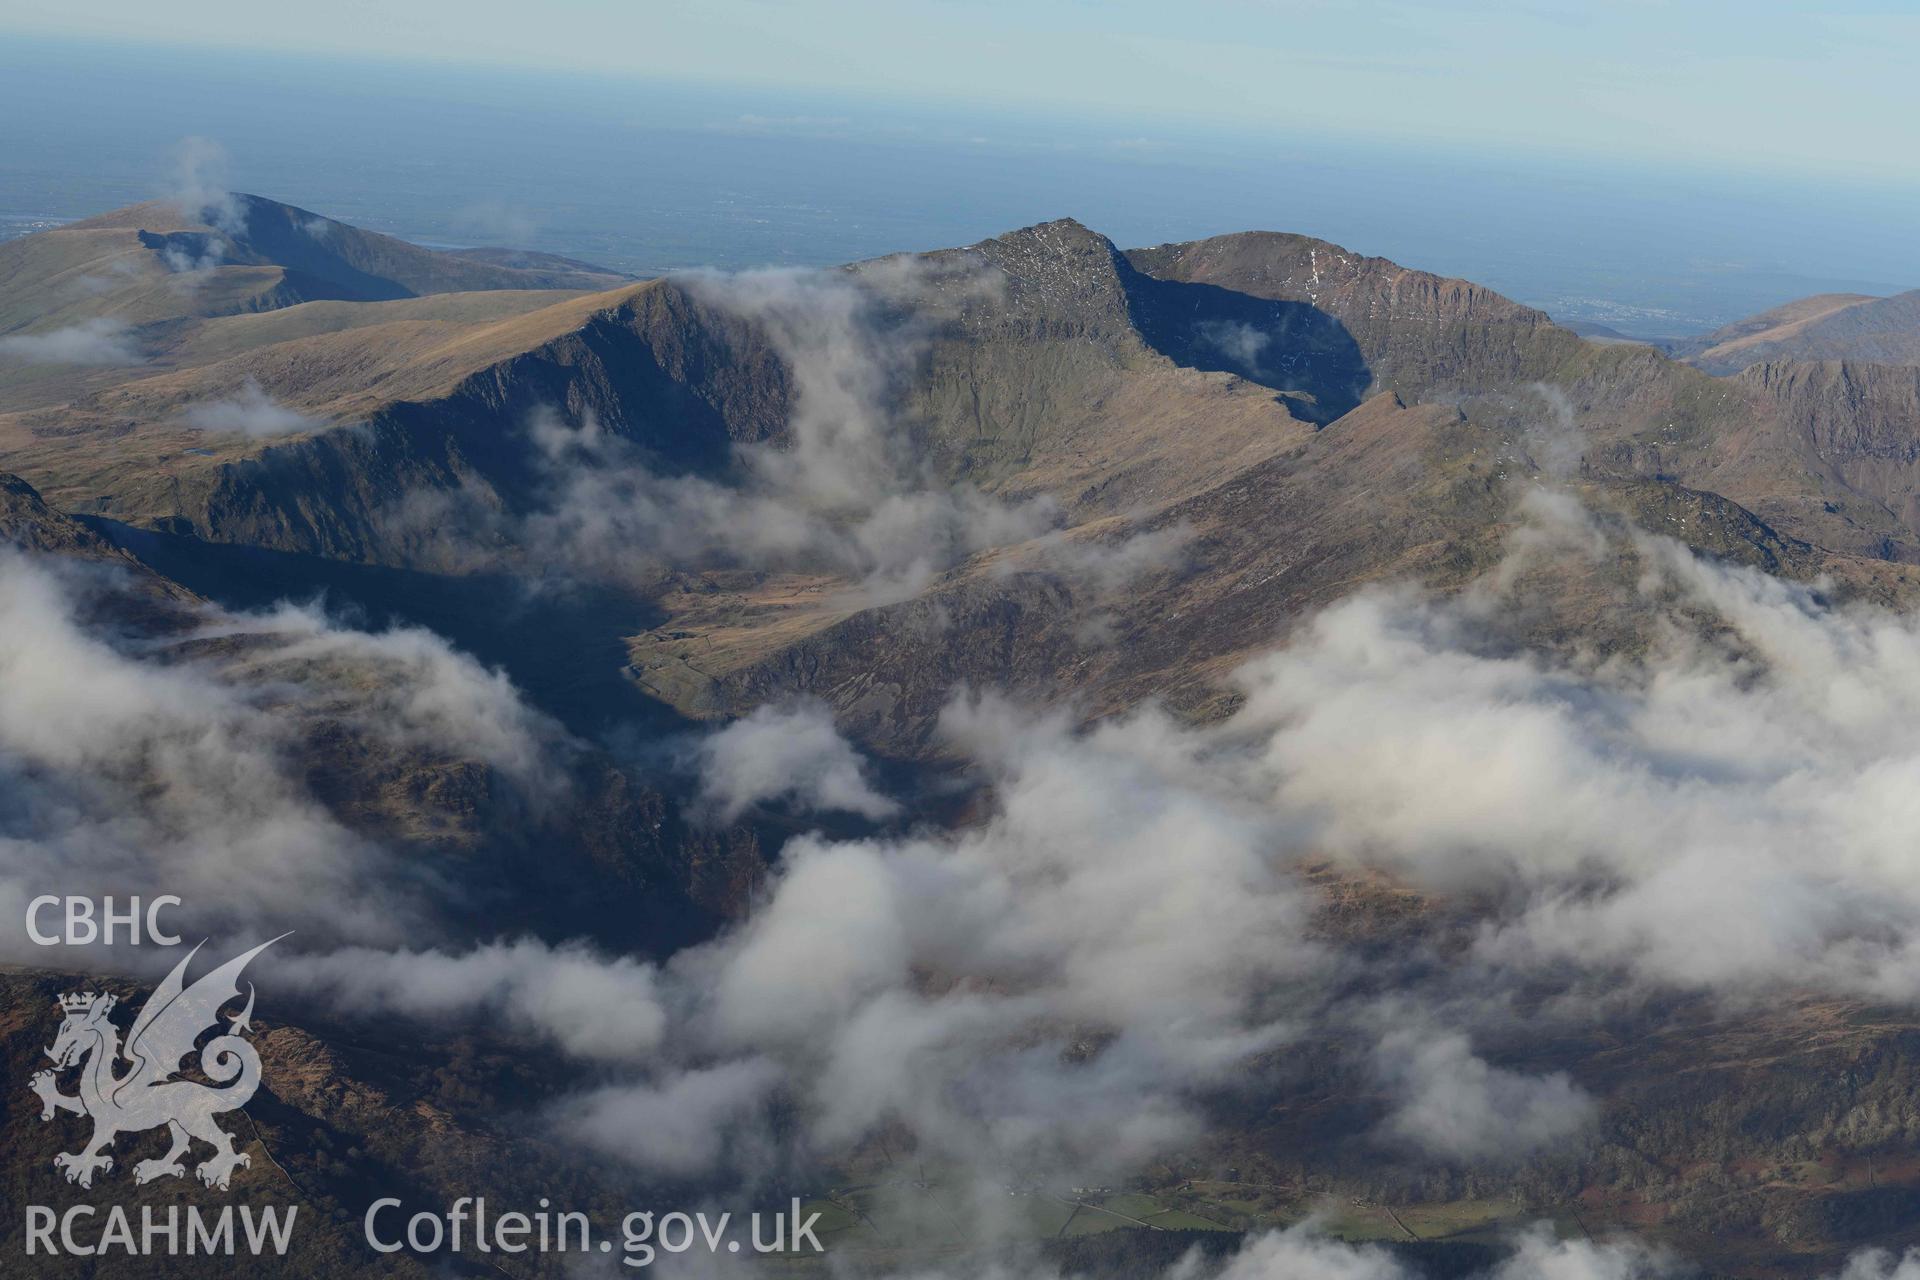 Oblique aerial photograph of Snowdon mountain landscape, taken from the south east during the Royal Commission’s programme of archaeological aerial reconnaissance by Toby Driver on 12th January 2022